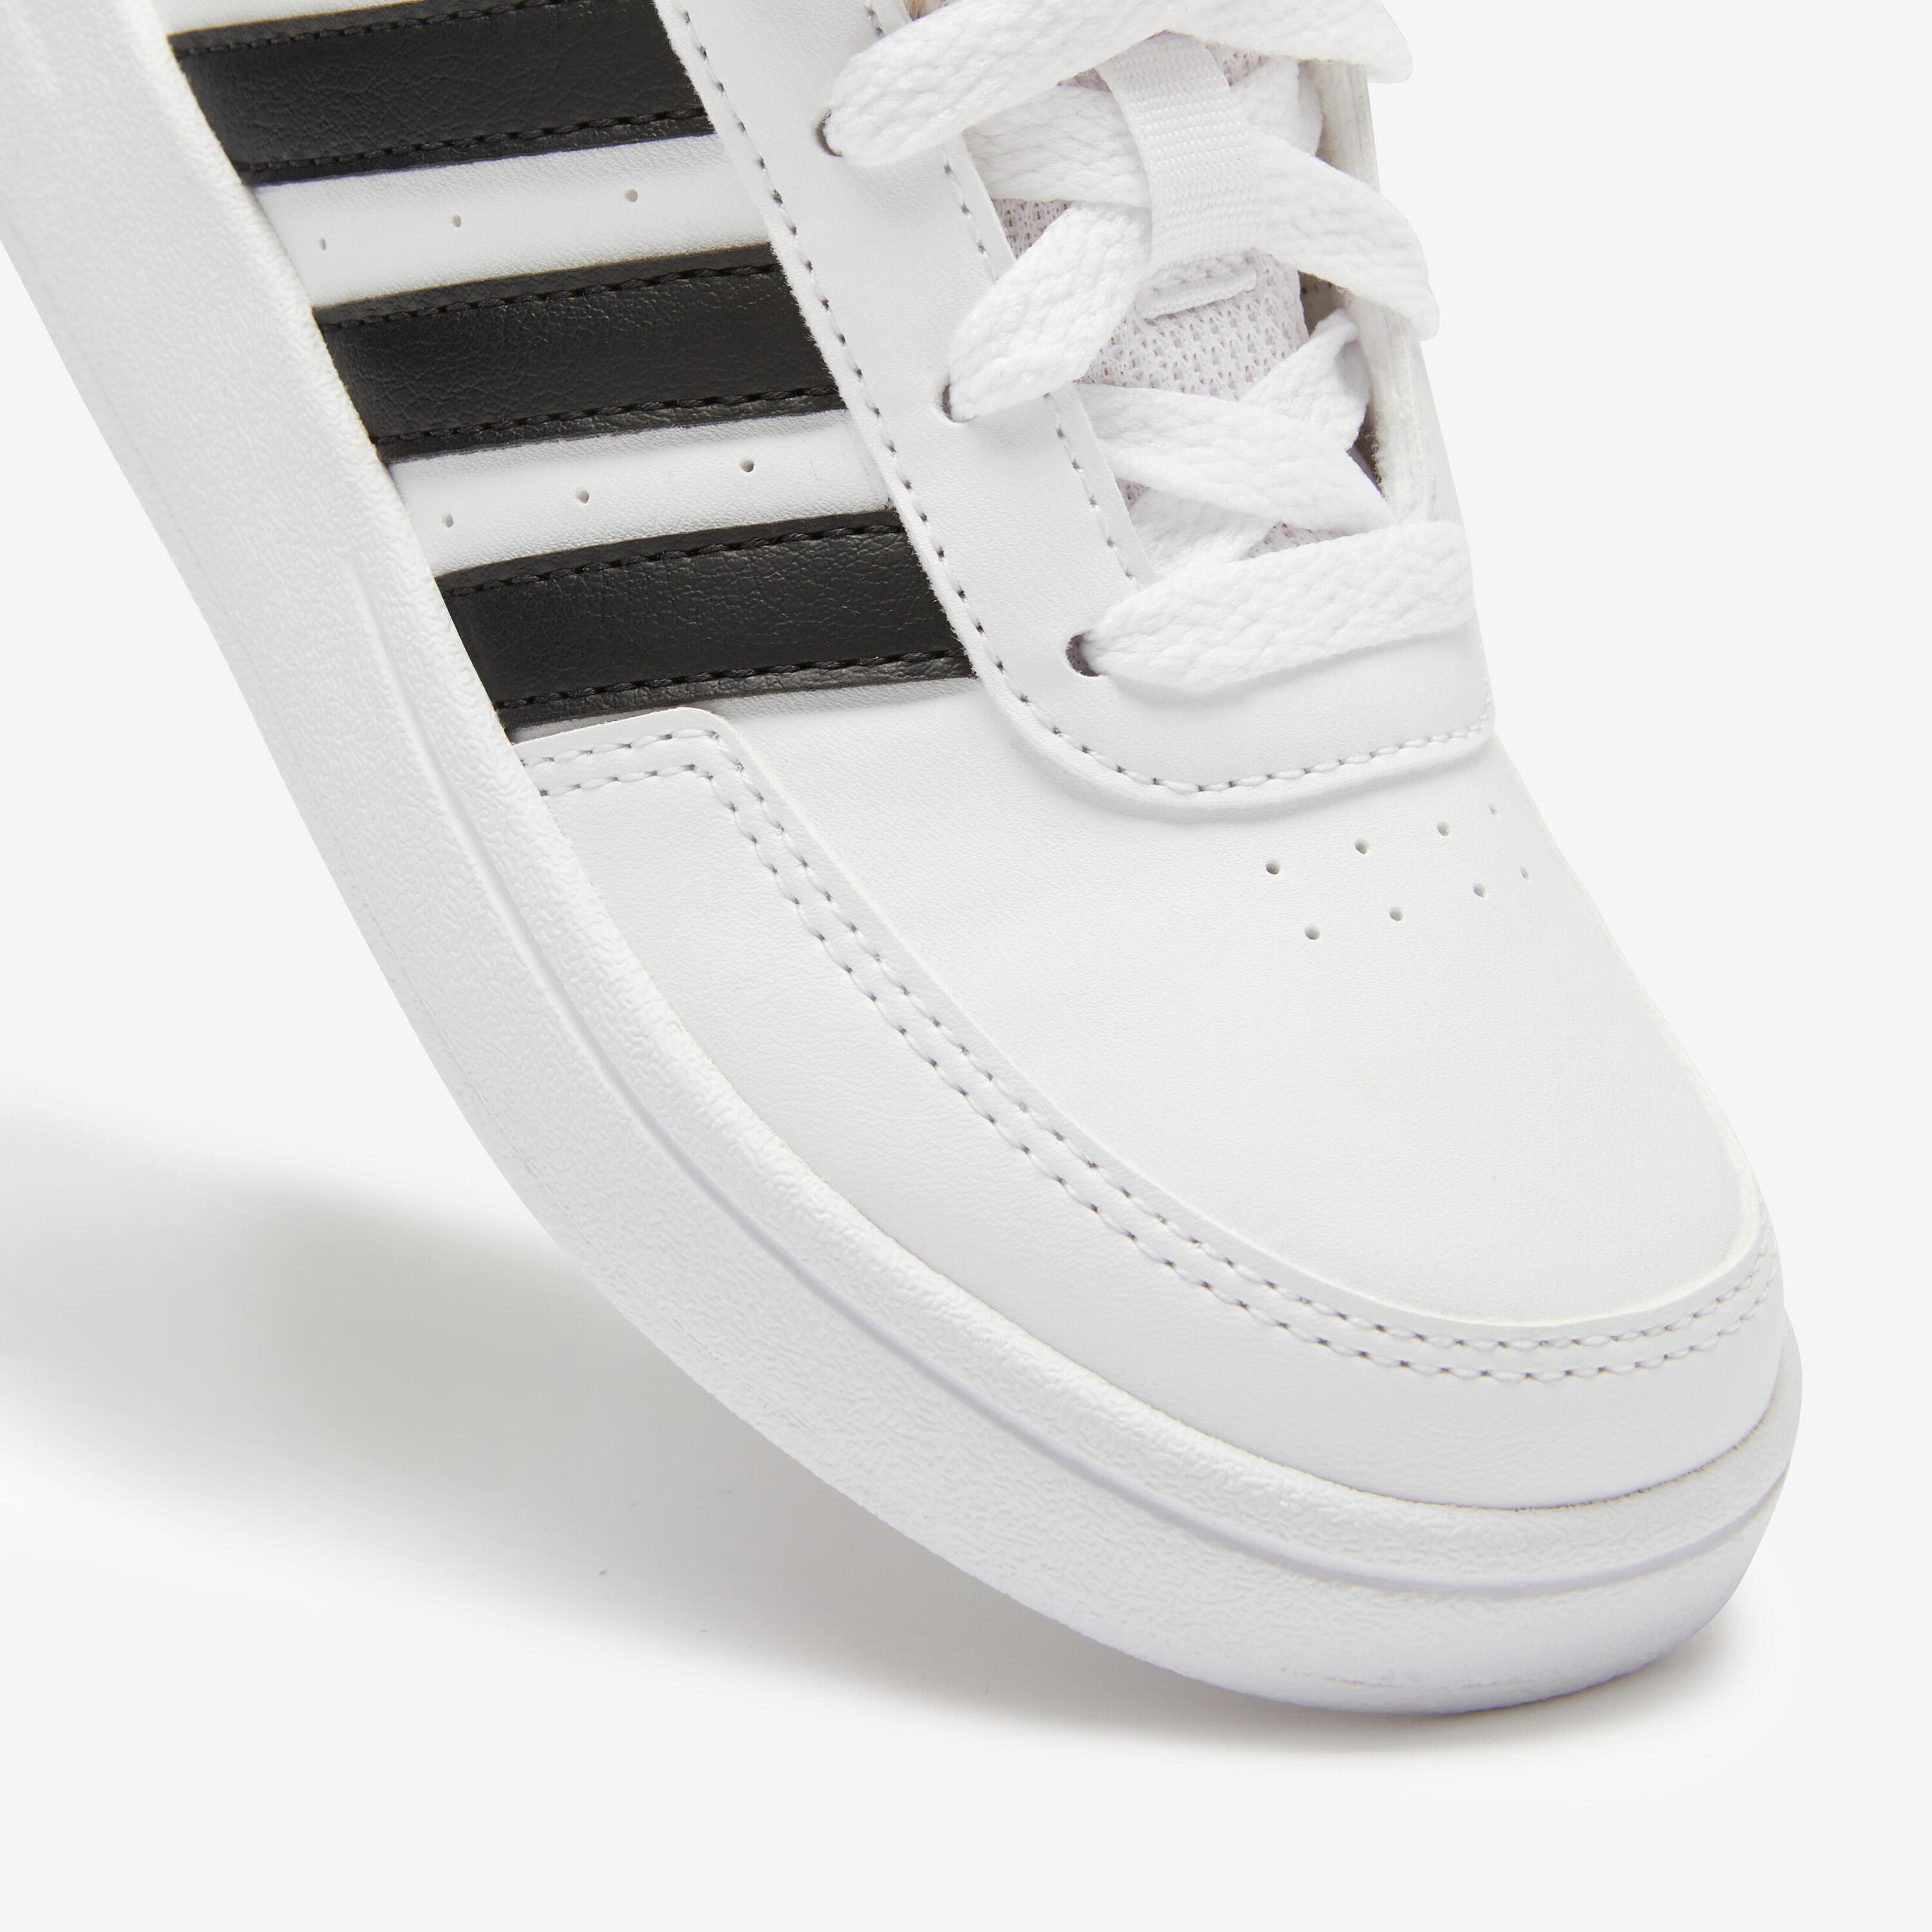 Kids' Lace-Up Trainers Breaknet - White/Black 4/7